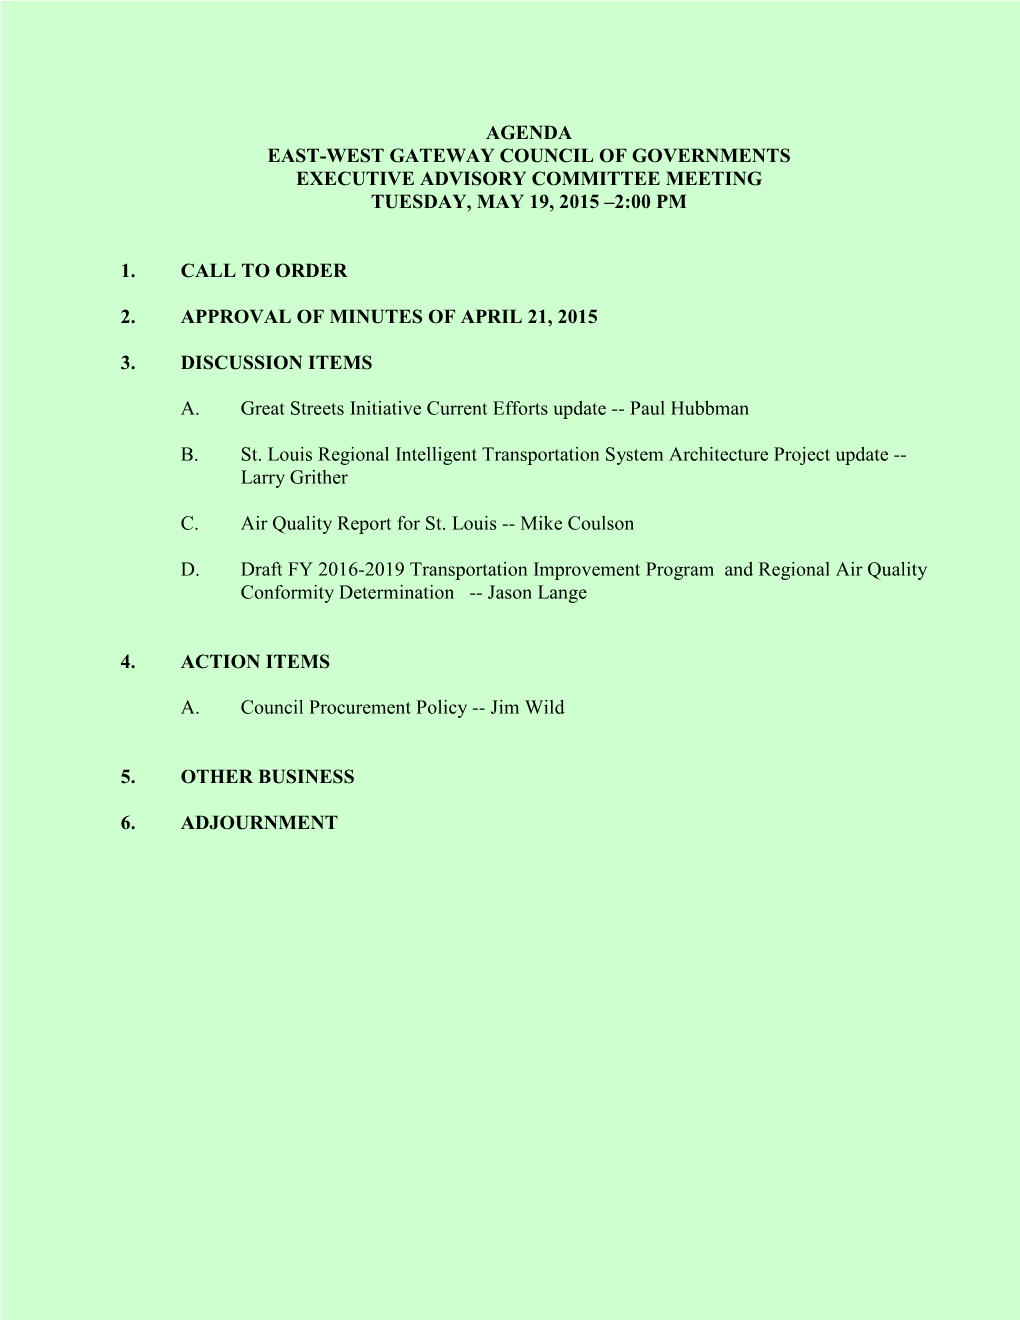 Meeting Packet: Executive Advisory Committee